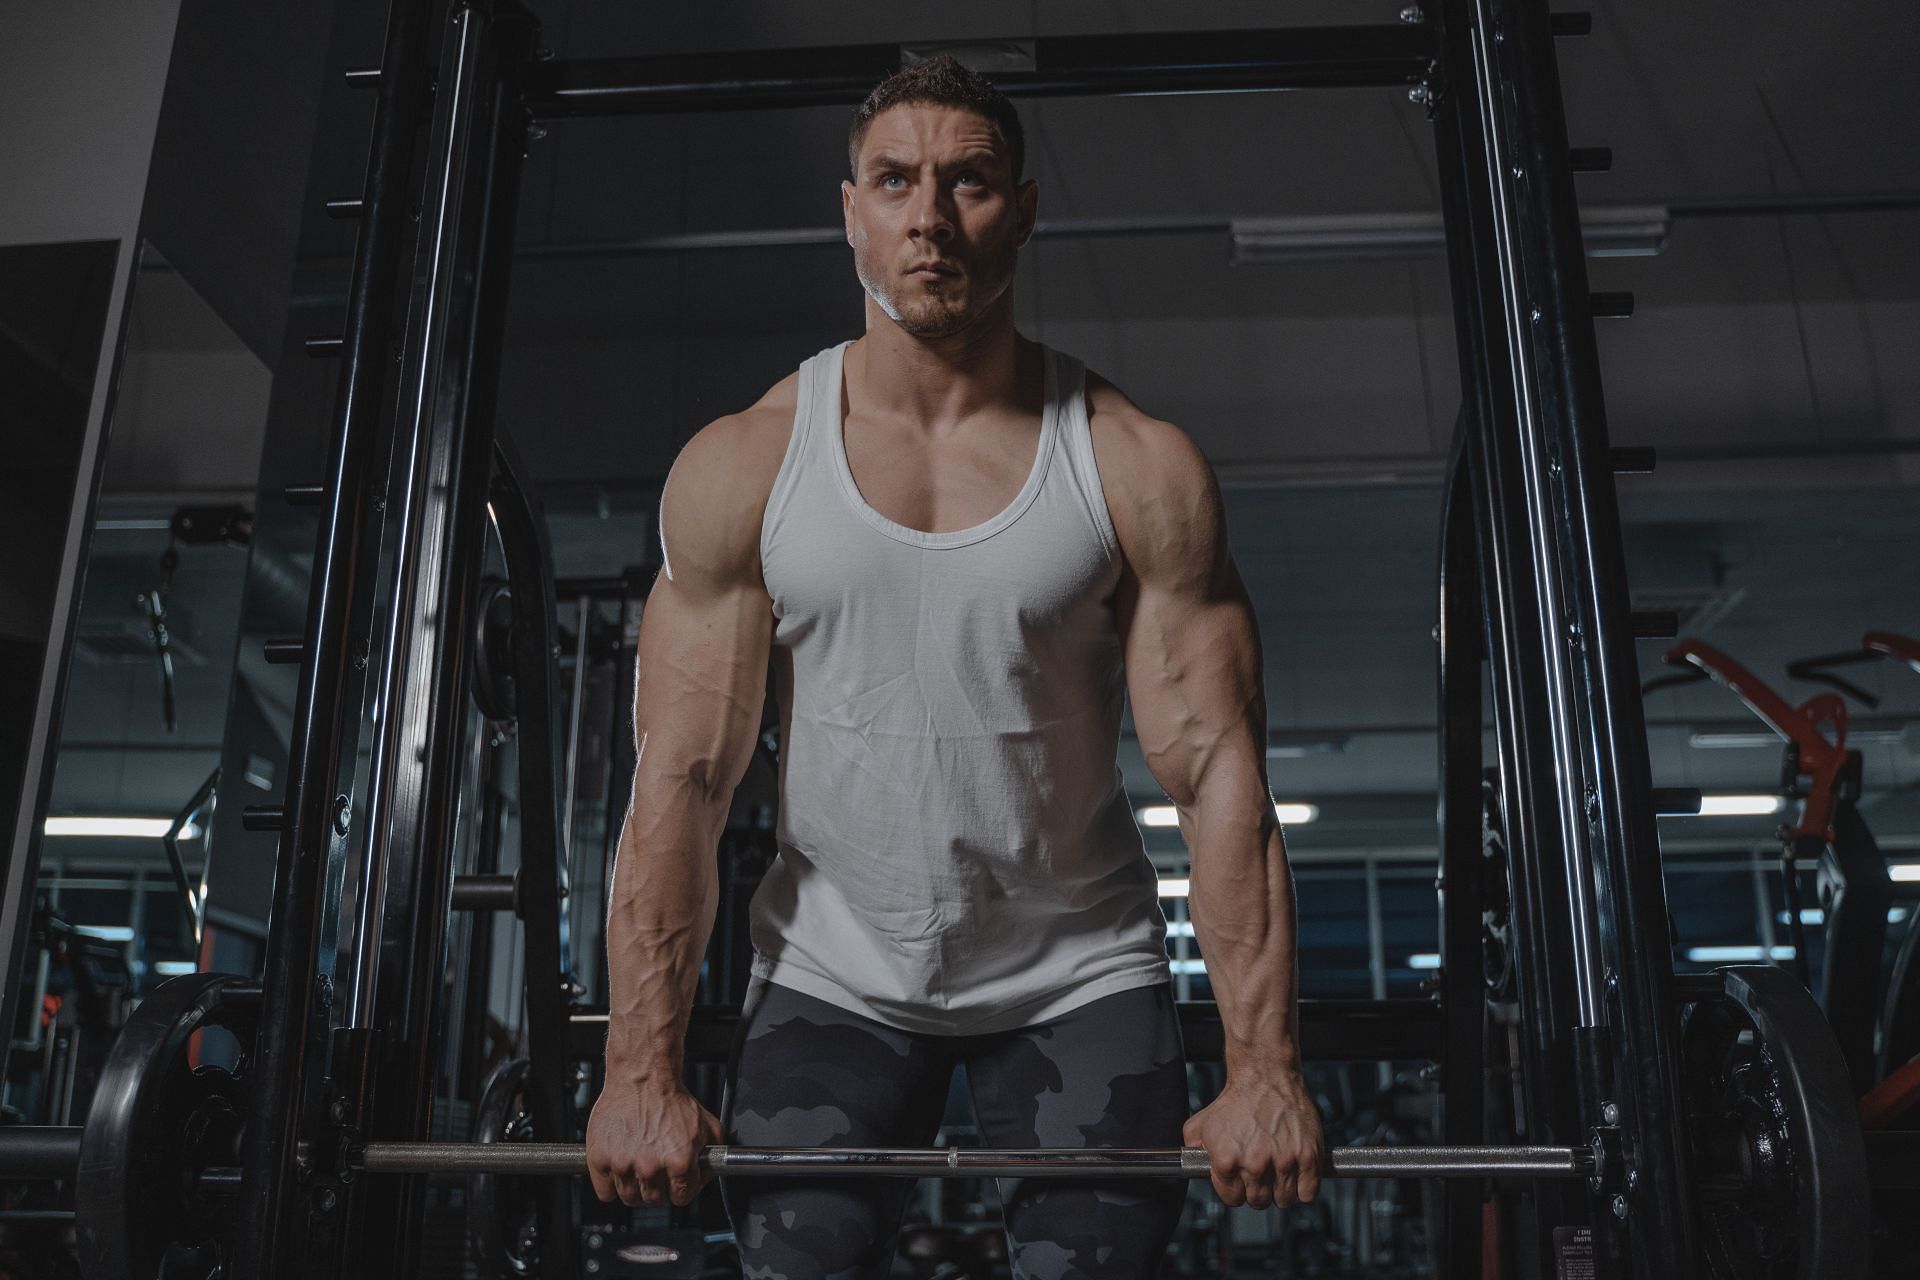 Strong arms will help you in lifting and carrying (Image via Pexels @Tima Miroshnichenko)